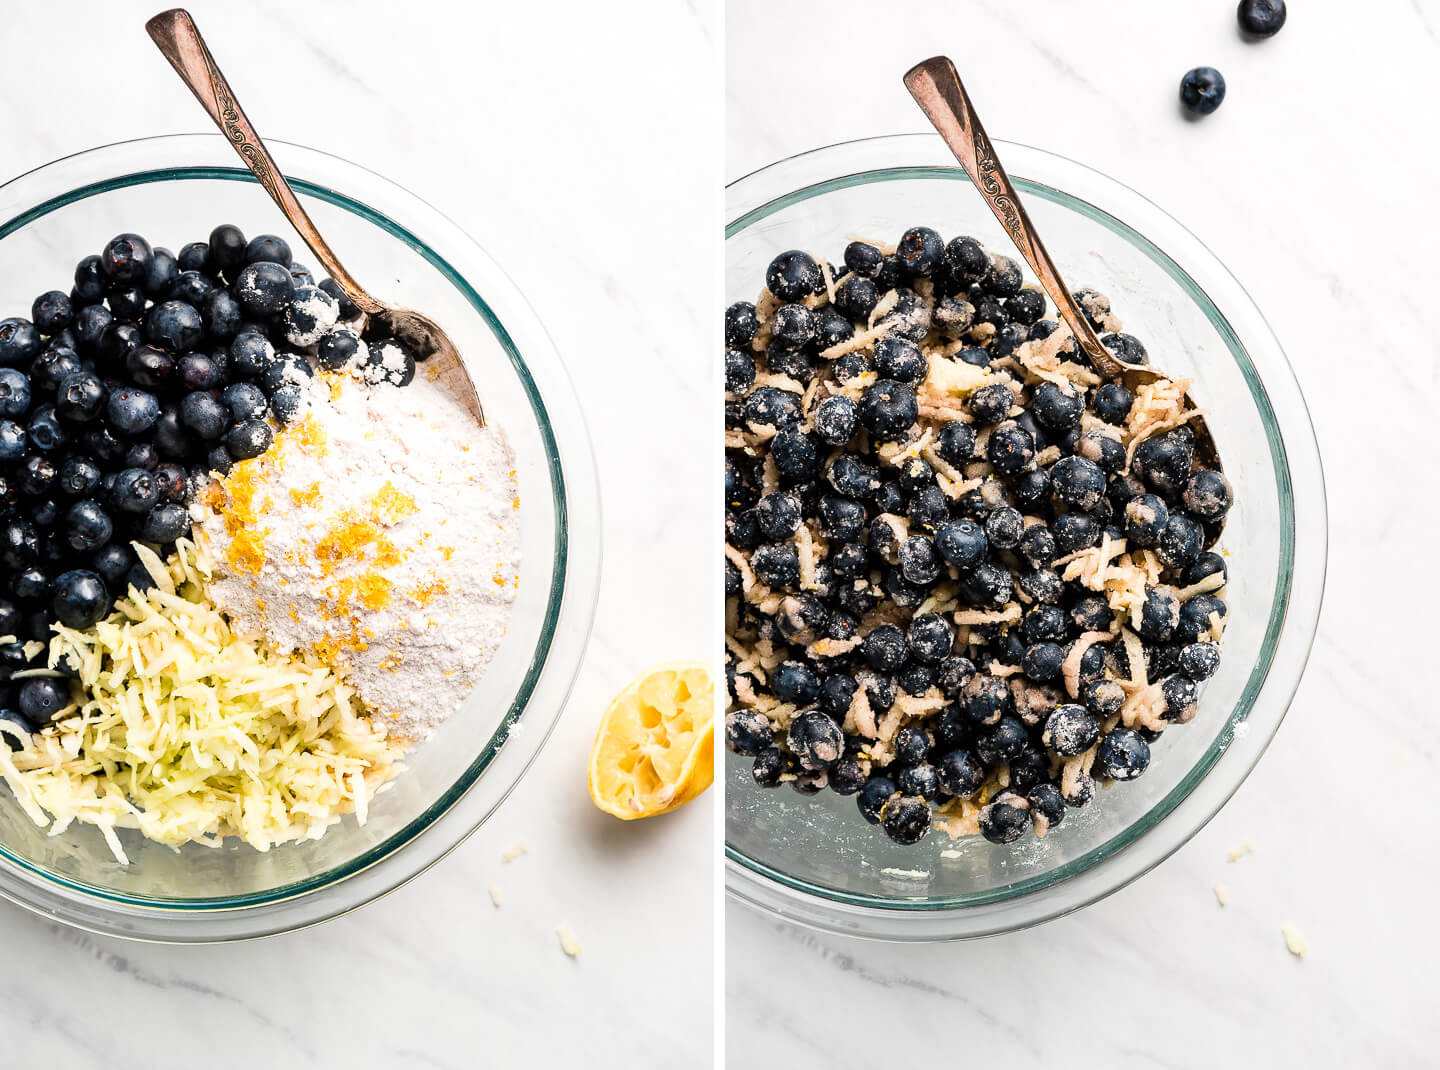 Diptych- Blueberries in a glass mixing bowl with sugar, shredded apple, and lemon zest; mixed together.